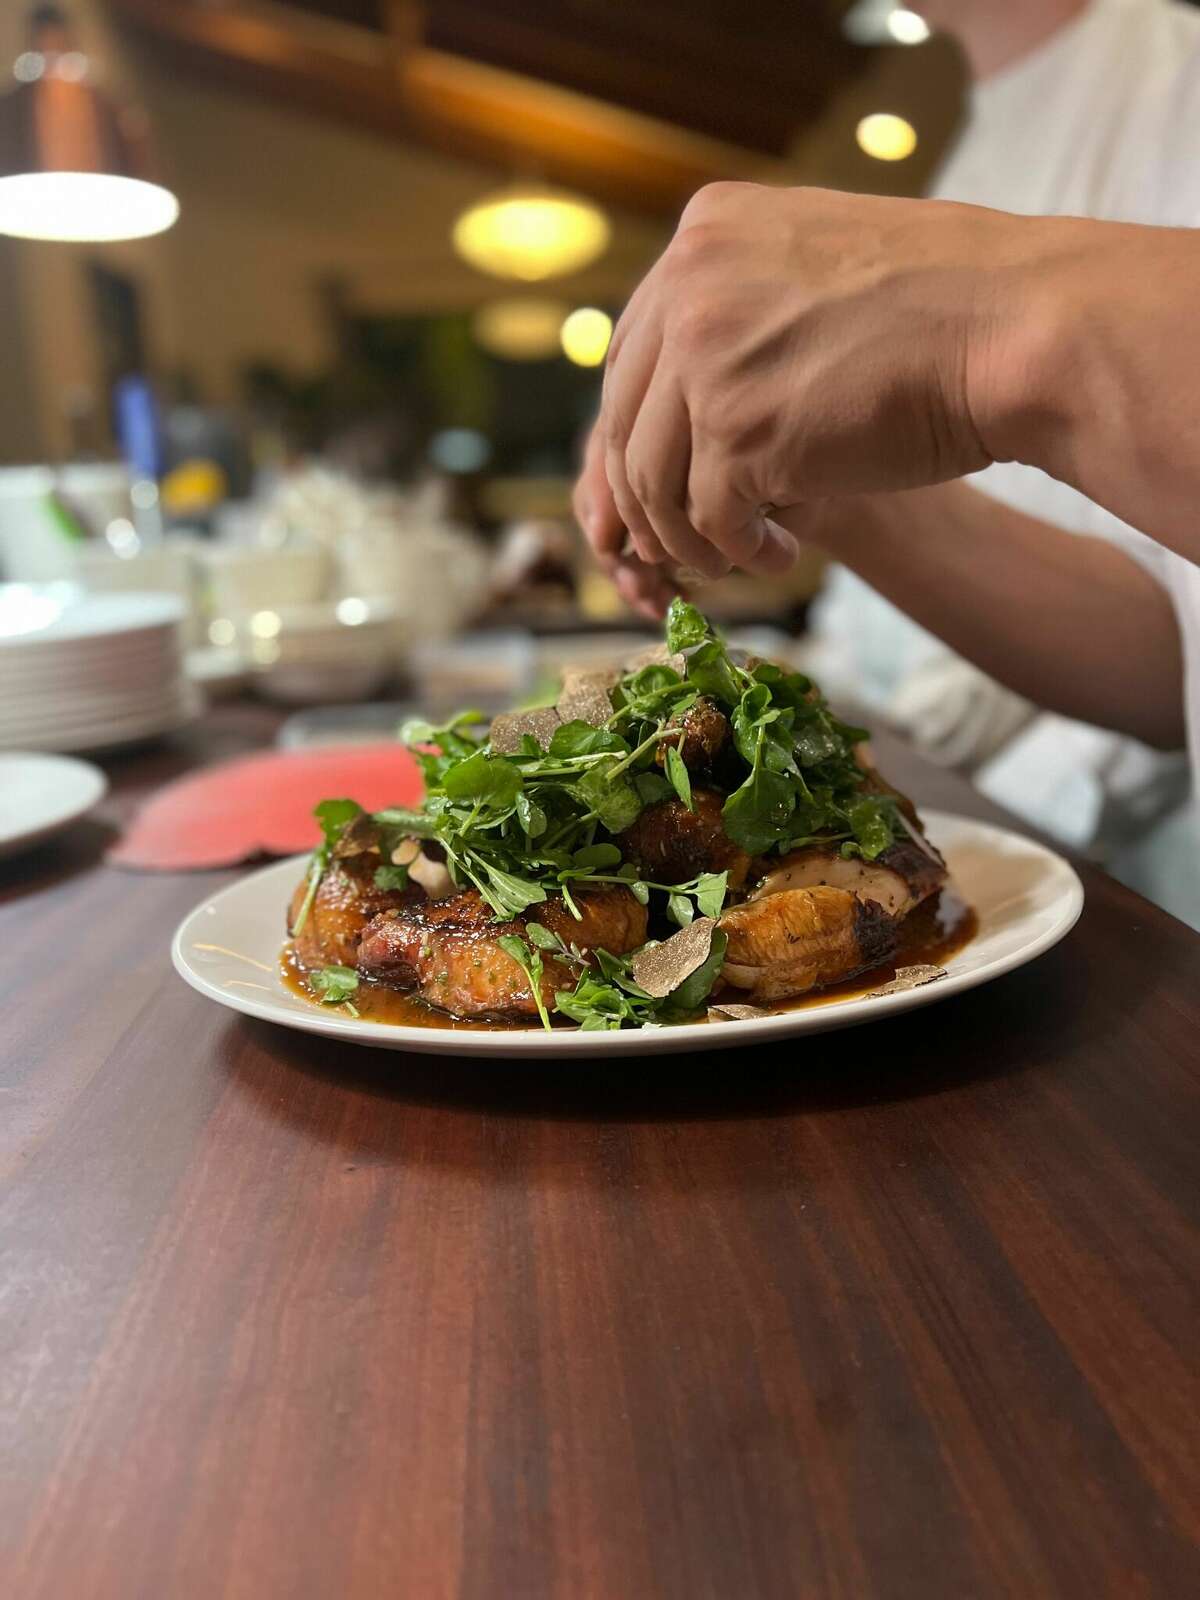 Chef Klaus Georis, a Monterey County native whose family has been in the hospitality industry for over 50 years, prepares dishes at his restaurant Maligne.